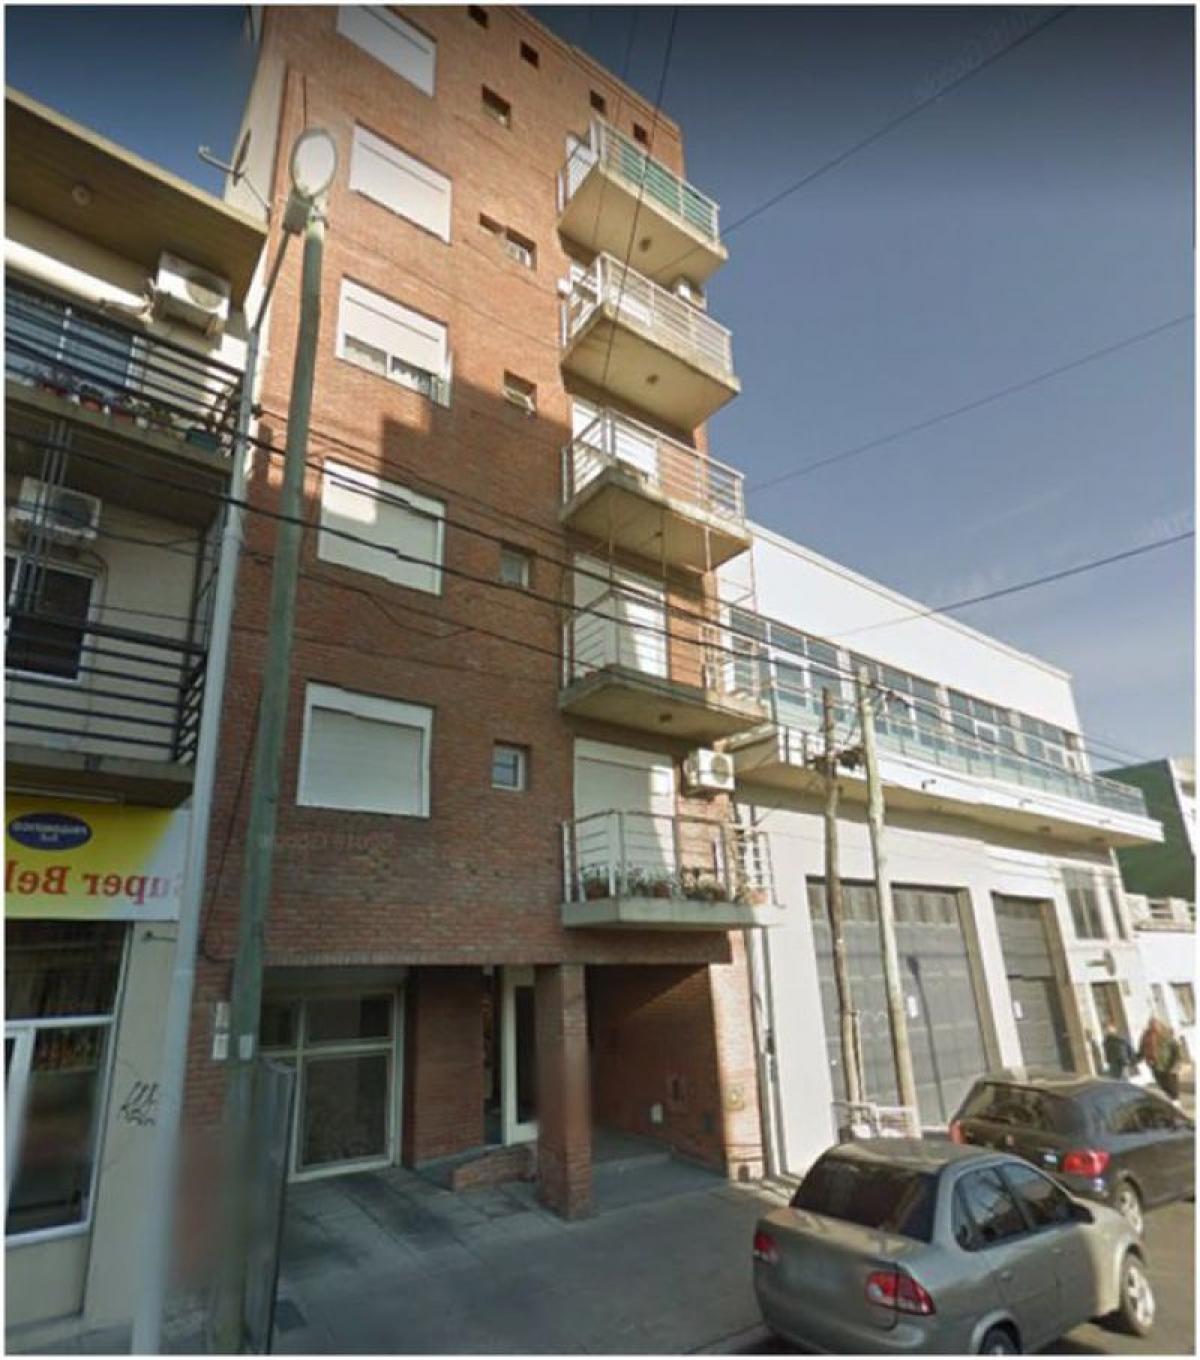 Picture of Apartment For Sale in Avellaneda, Buenos Aires, Argentina